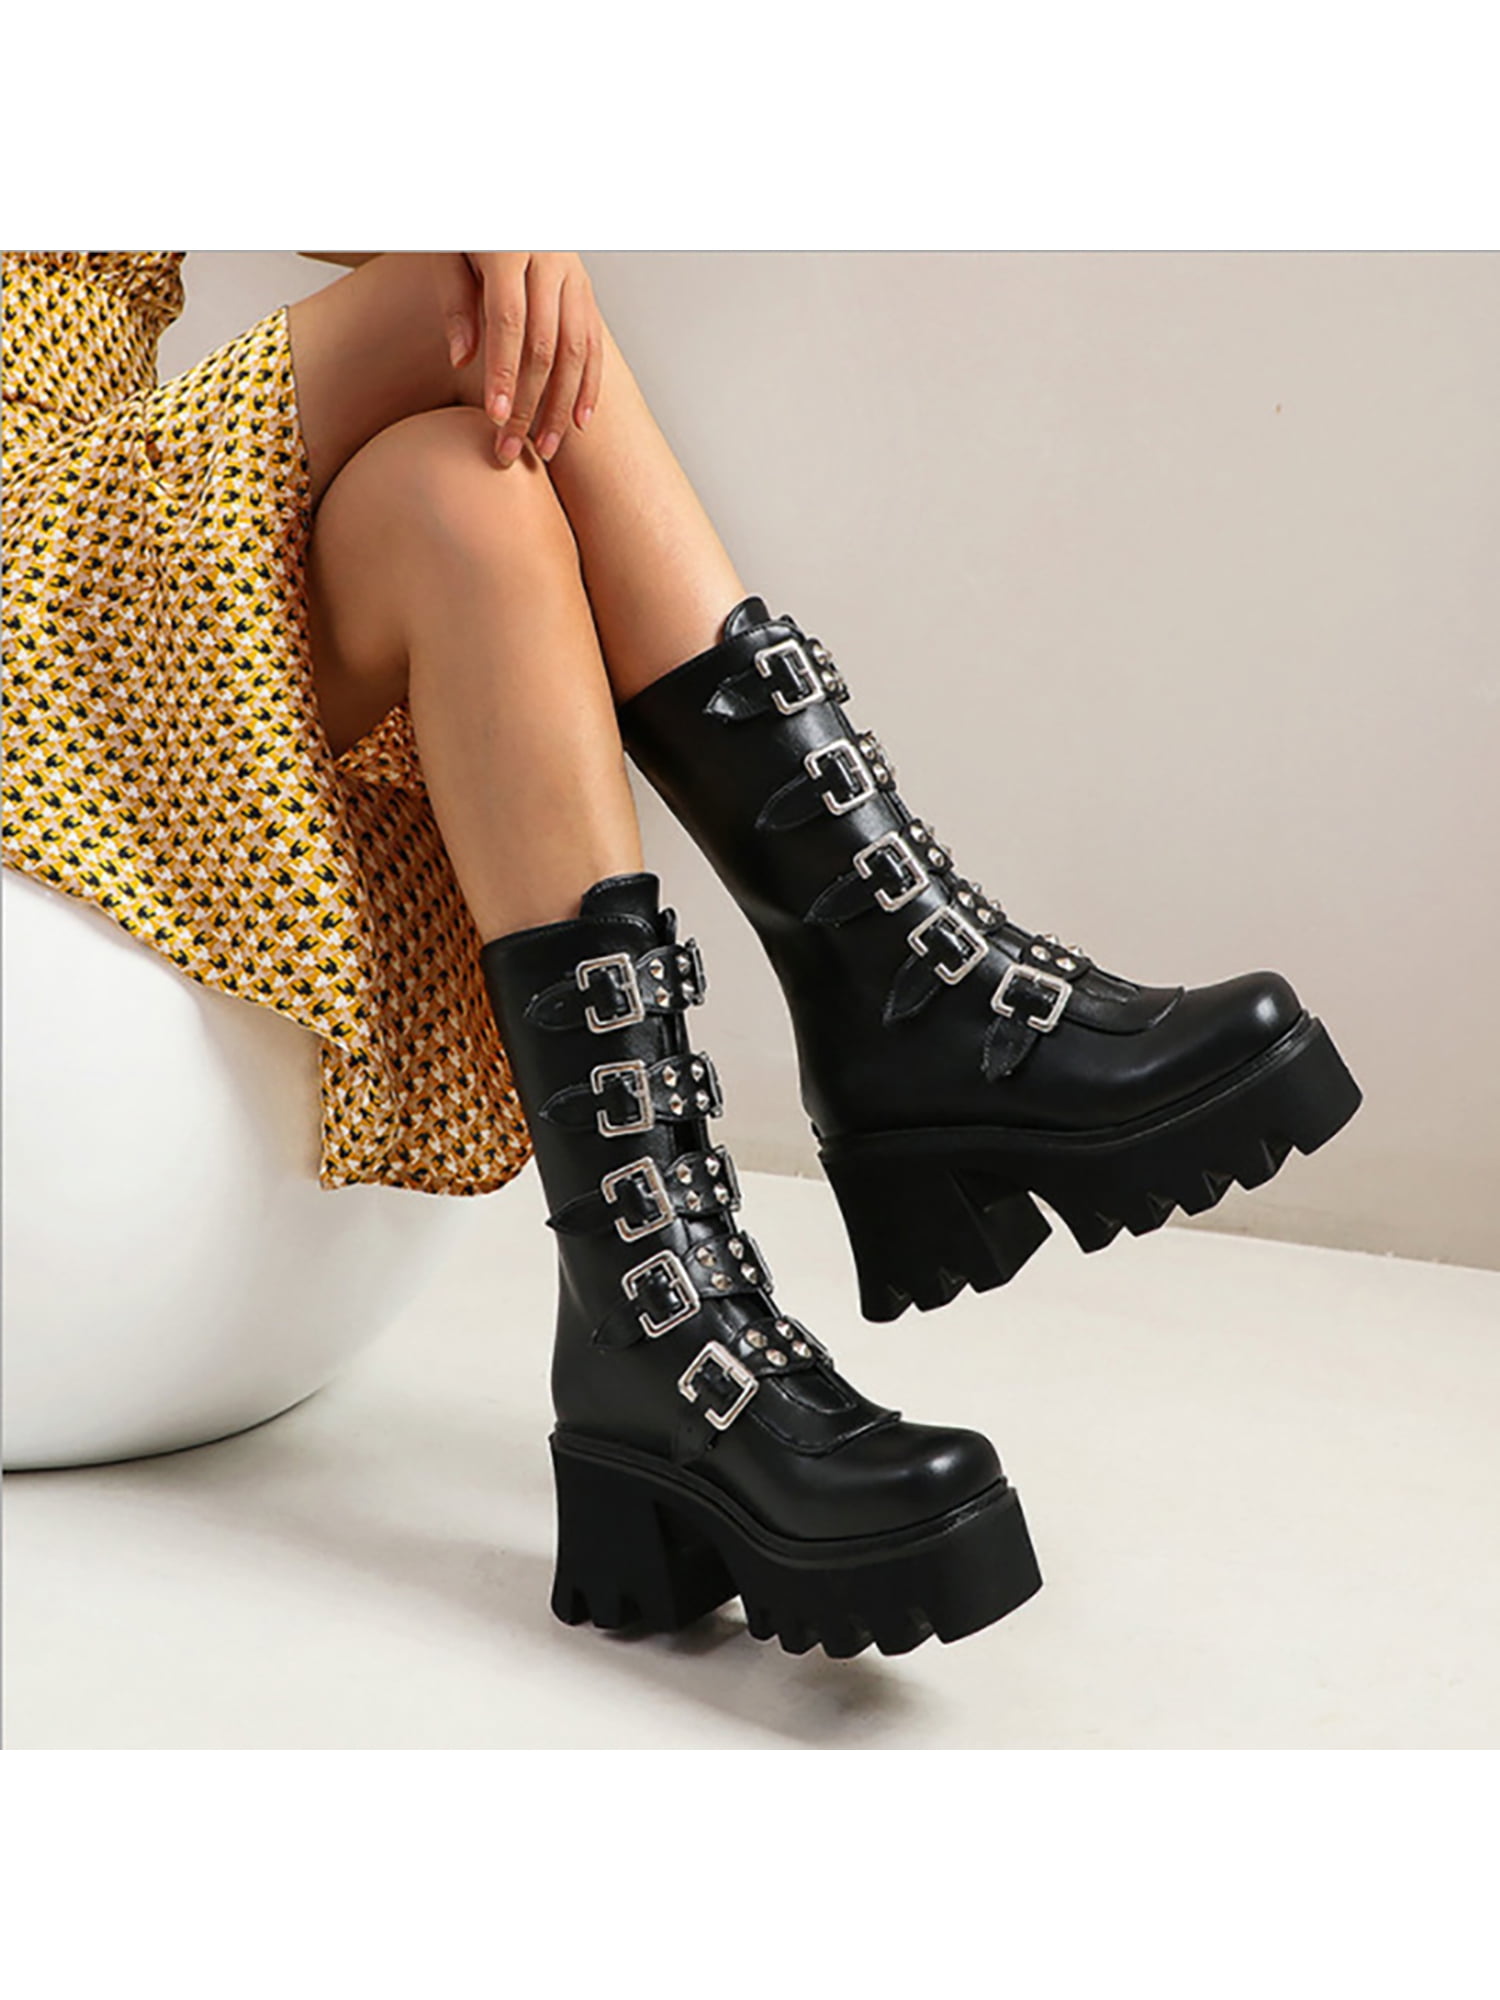 Mid Heels Thick Sole Lace up Wedge Ankle Booties Womens Square Toe Platform Short Boots